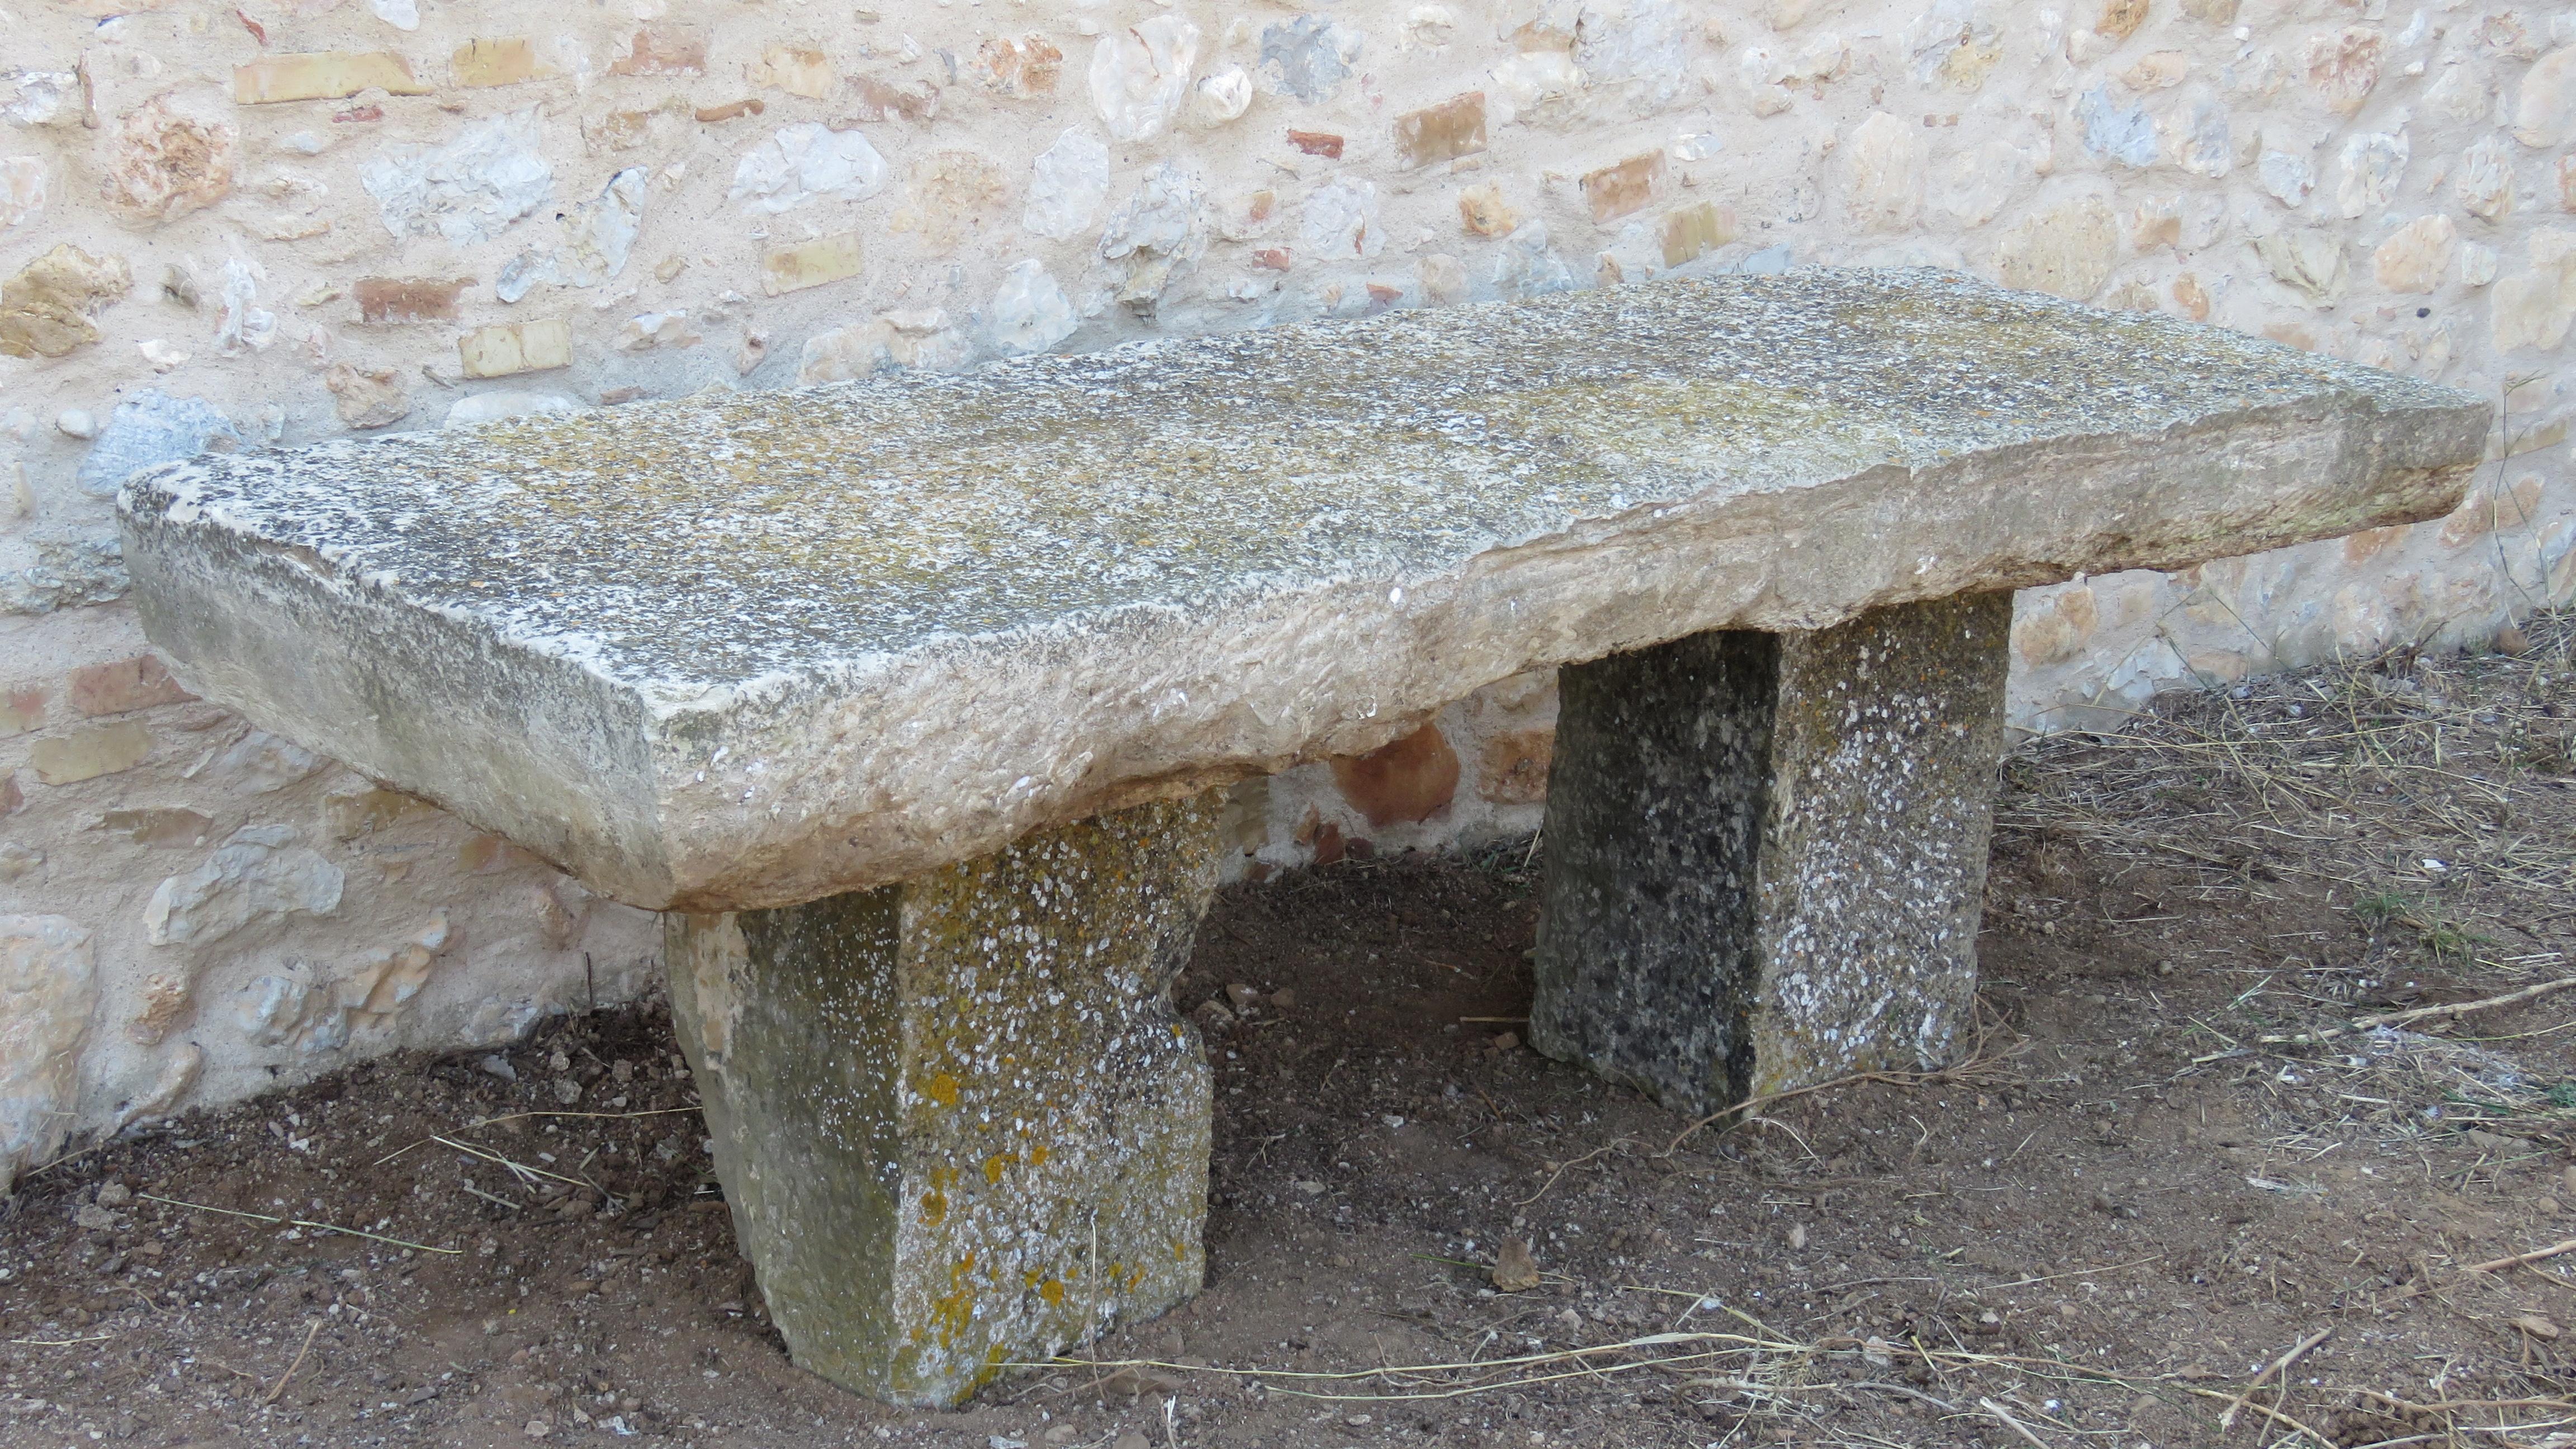 Of massive rectangular roughly hewn form, with tapering apron, raised on rectangular section plinths. 

Plinths height: 25 